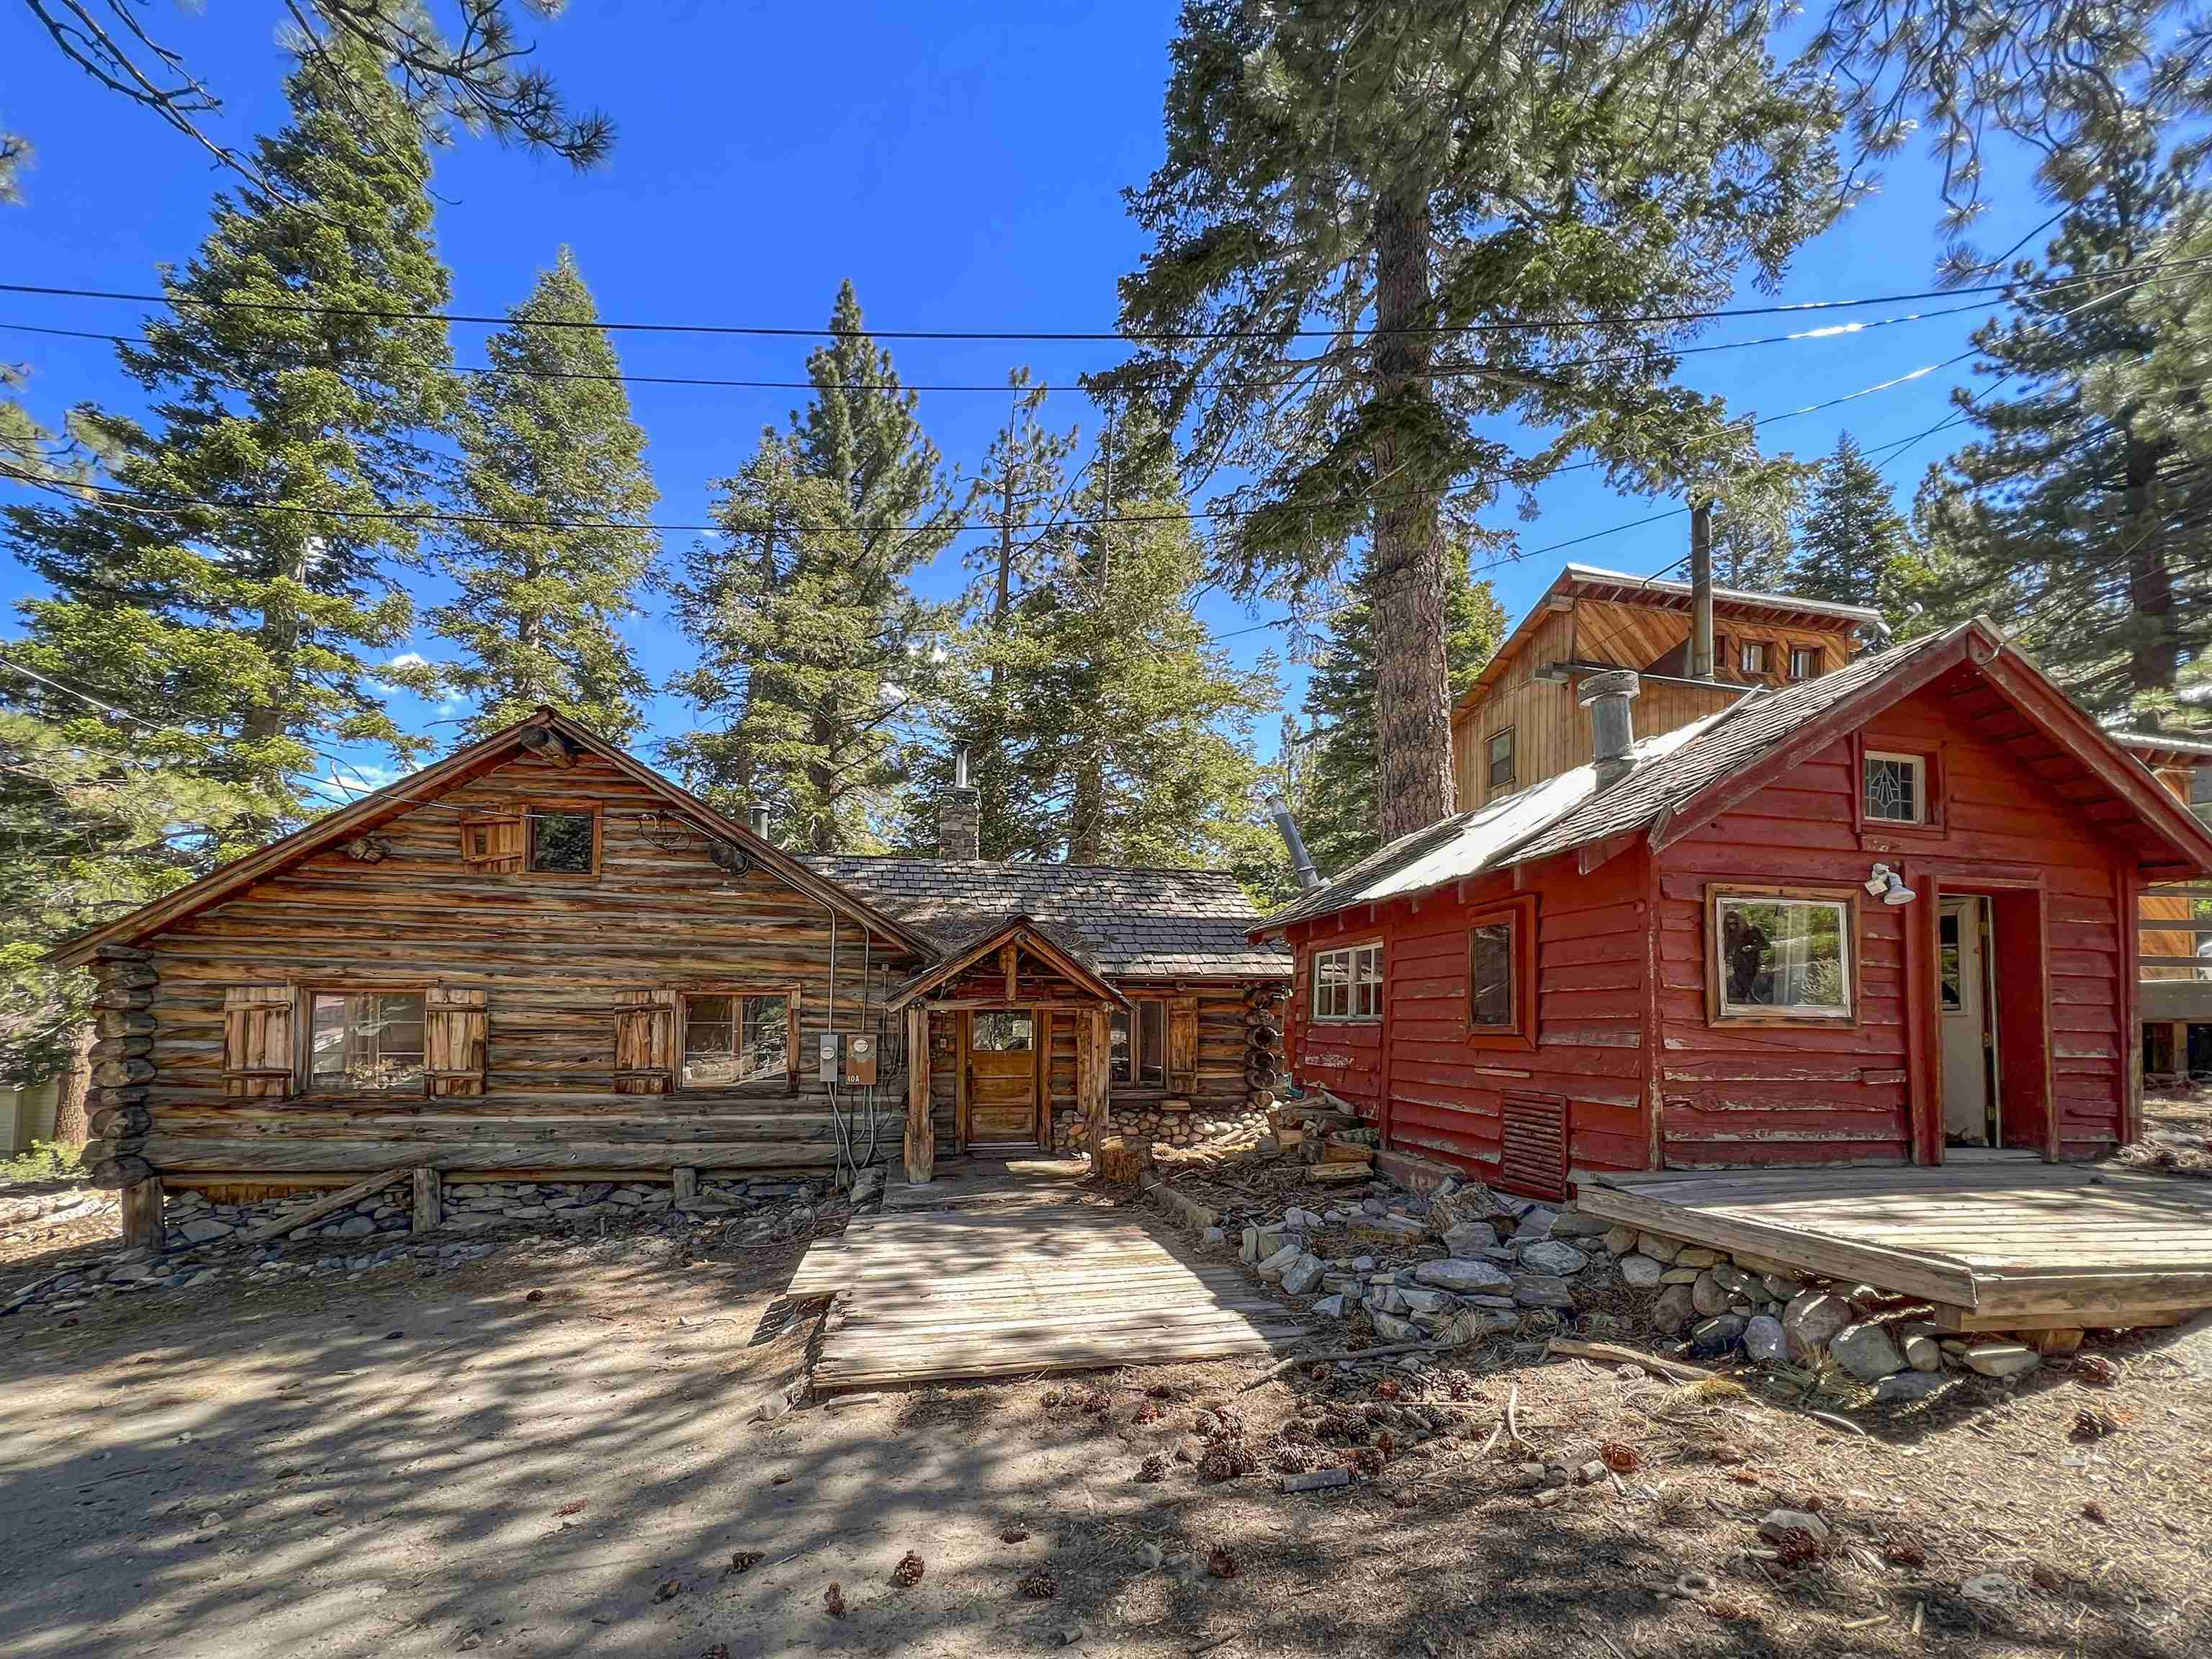 Charming Cabin in Old Mammoth! On this half-acre parcel you will find TWO homes. The first, “The Robinson Cabin”, is an original log cabin from the late 1920s and is approximately 1196 sq. ft. This one-bedroom plus loft and one-bath cabin has so much history, it served as the community center of the Mammoth Camp area in the 1950s and features a faded shuffleboard court and checkerboard painted on the floor. There are paintings from the 1930s on the ceiling and carvings throughout. The history here goes on and on! The second medium-sized structure is a two-bedroom one-bathroom house built in the 1980s and is approximately 656 Sq. ft. This home features a kitchen and balcony with gorgeous views of the Sherwin Range. The smallest structure on the property is currently a storage shed. The possibilities here are endless. This is the perfect opportunity for someone to live in one house and rent the other. Or, start from scratch and build your dream home on this secluded part of town. This property is sold in AS-IS condition.